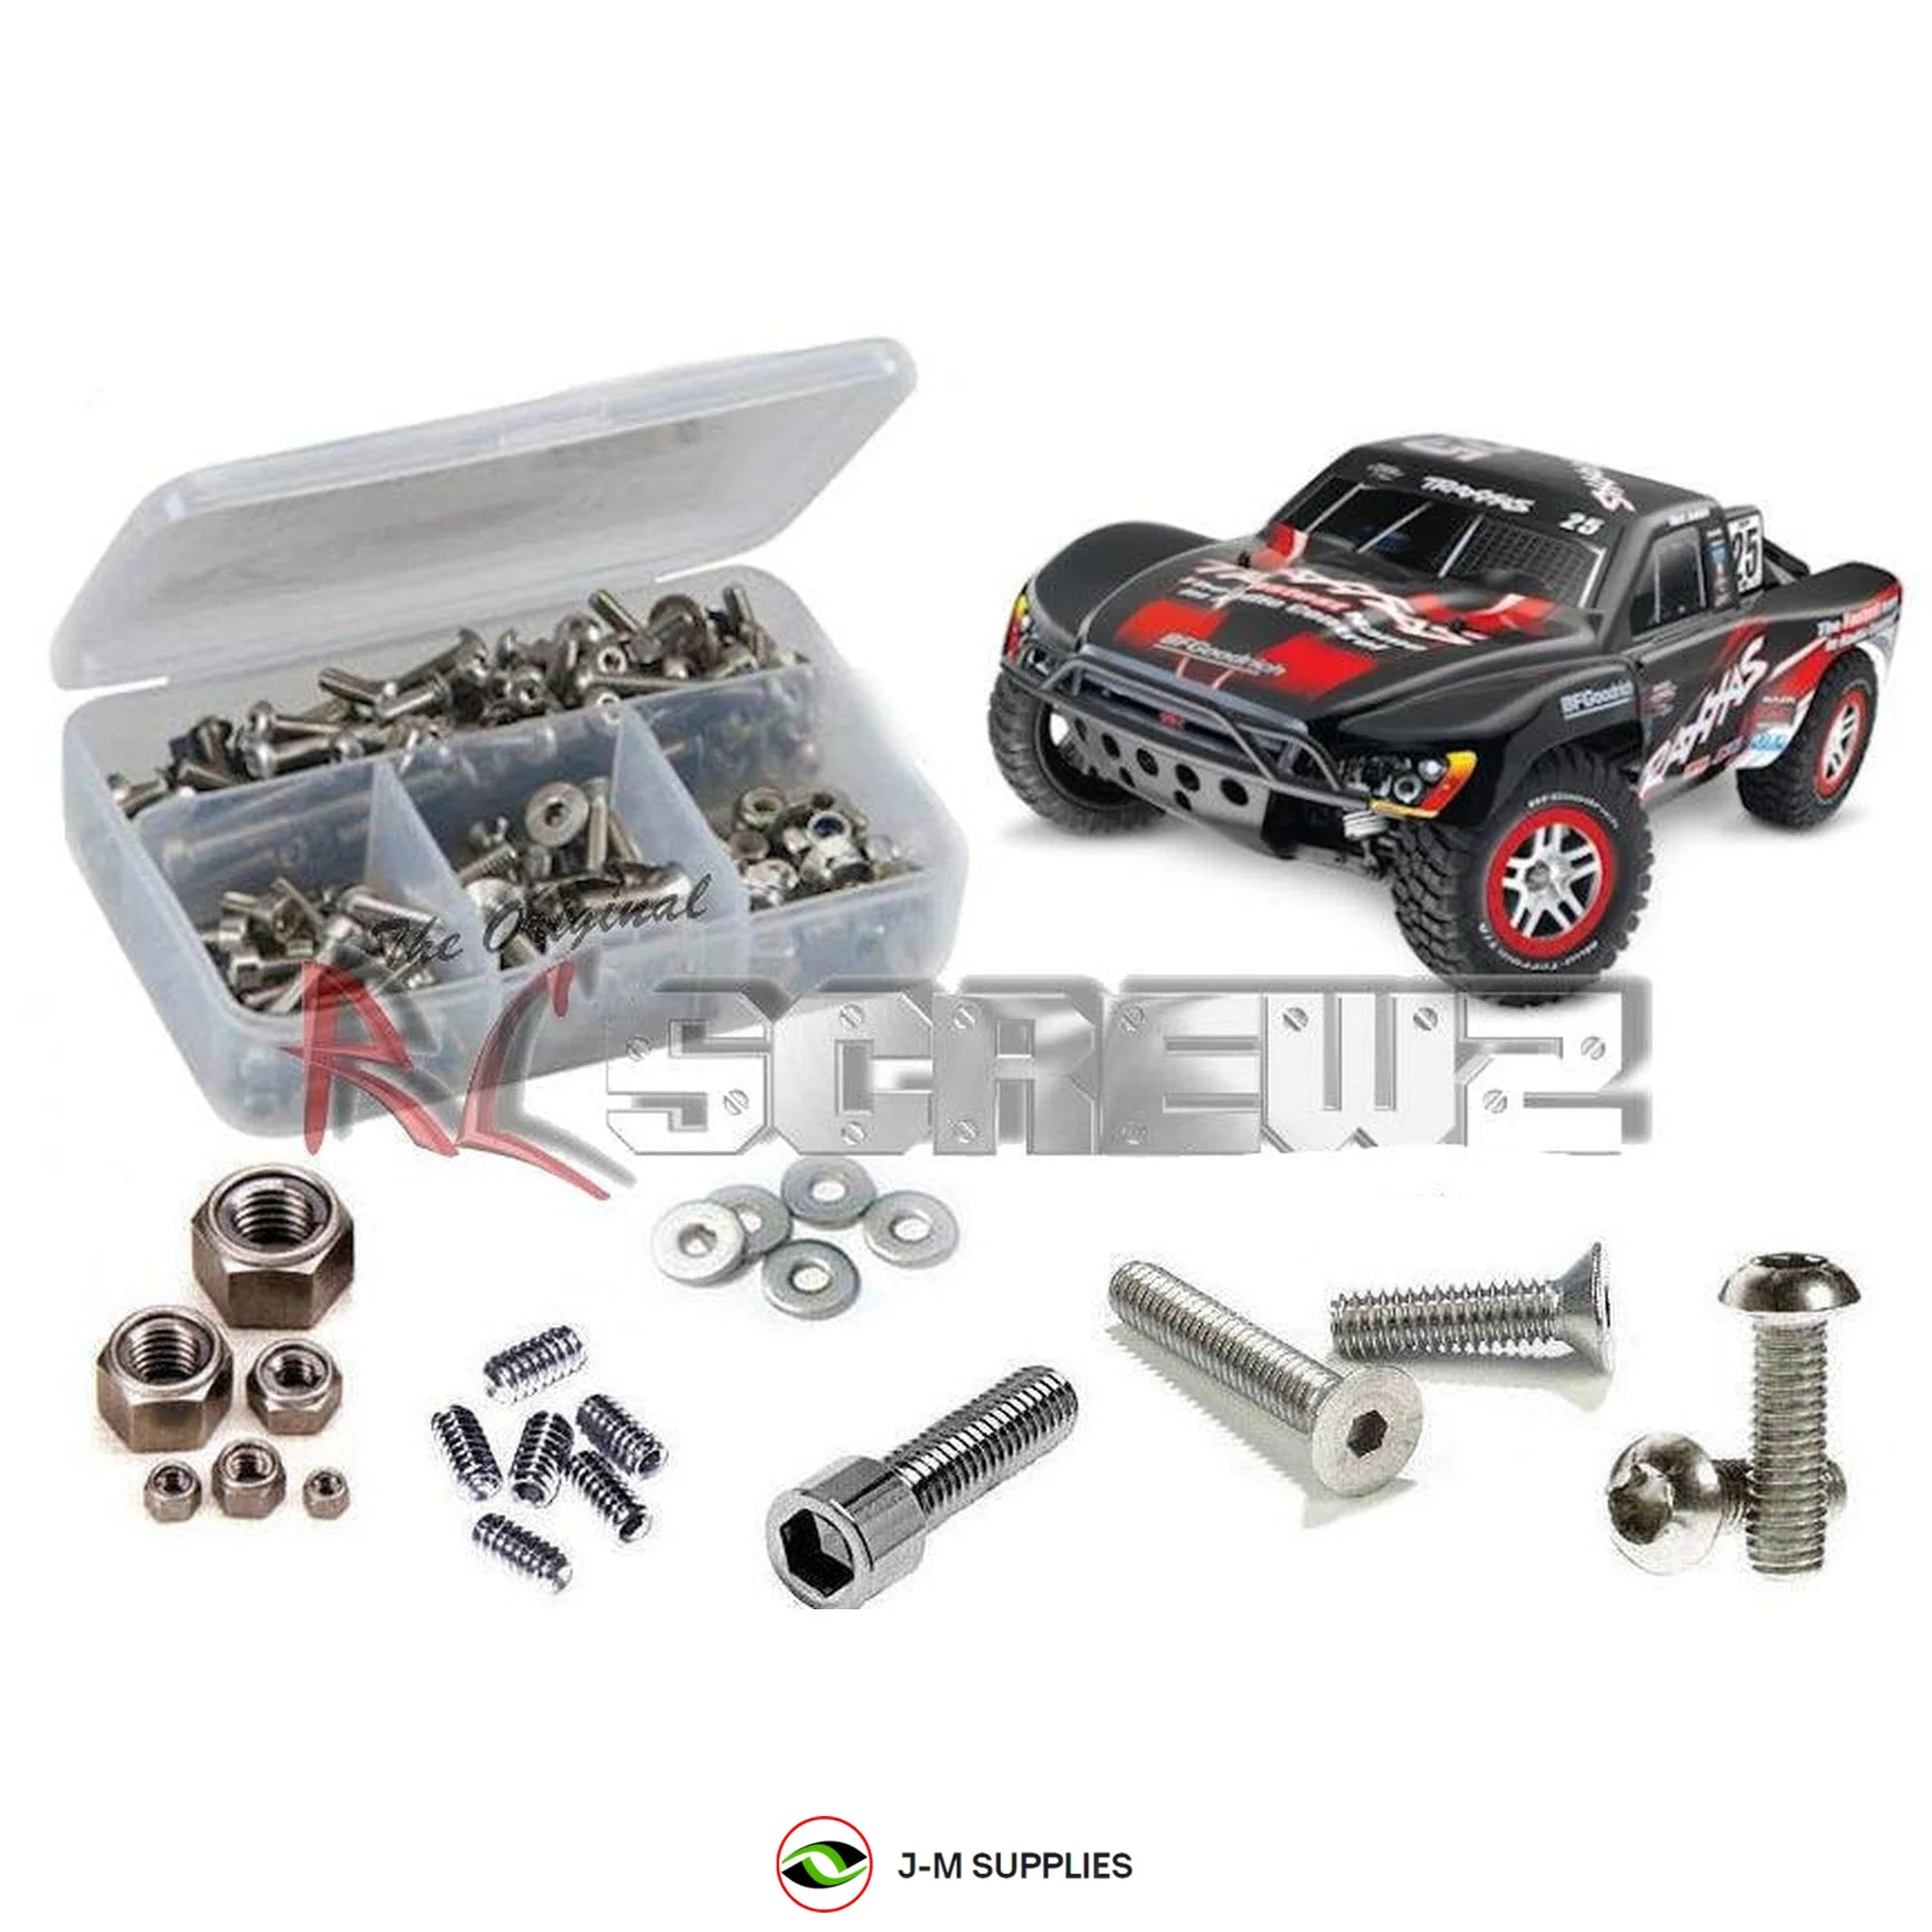 RCScrewZ Stainless Screw Kit tra039 for Traxxas Slash 4x4 1/10 (#68086) SC Truck - Picture 1 of 12